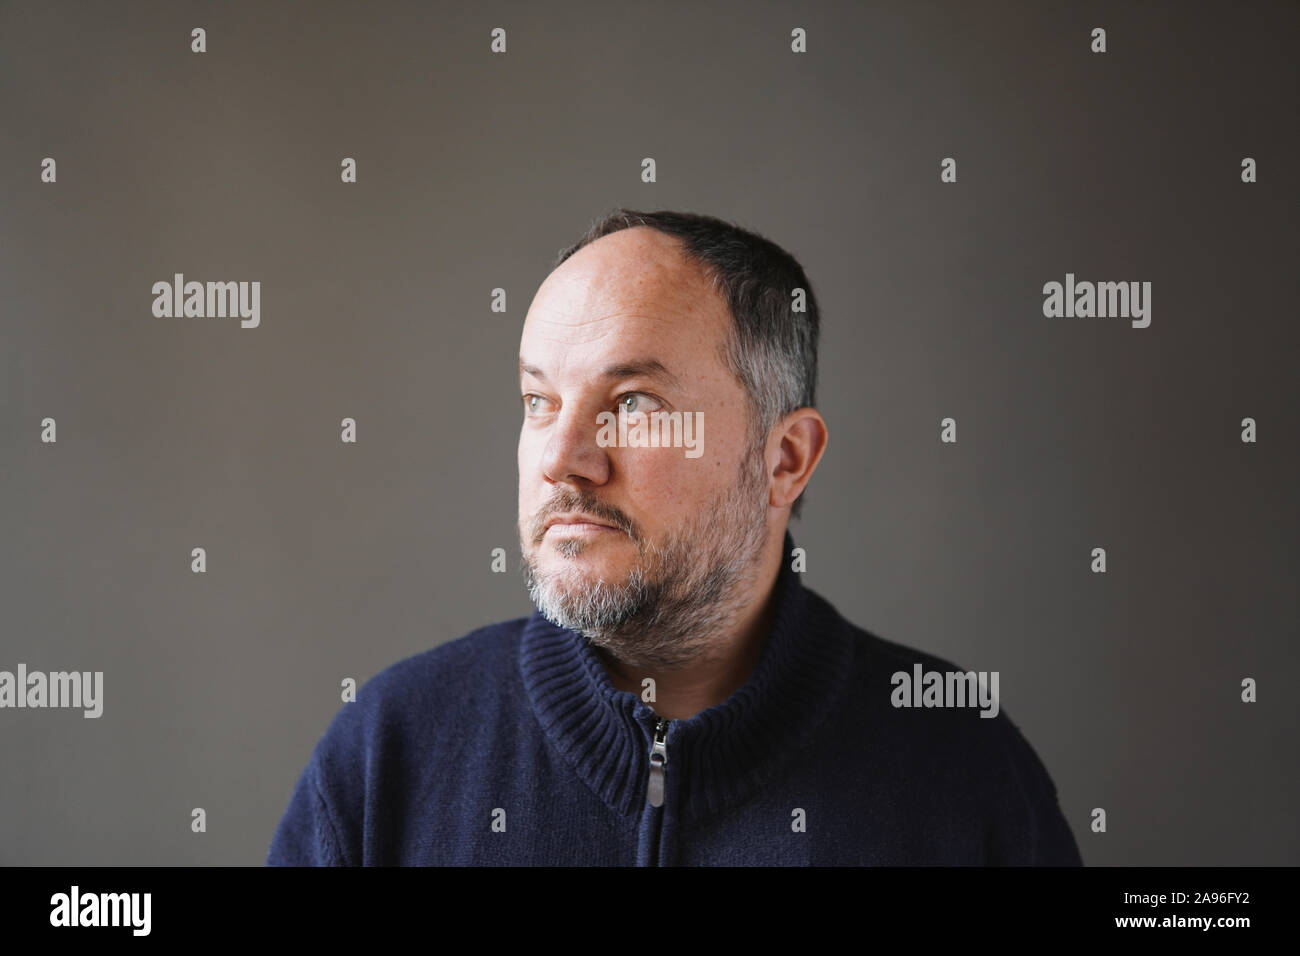 50 year old man with graying hair and beard looking away thinking - grey wall background with copy space Stock Photo